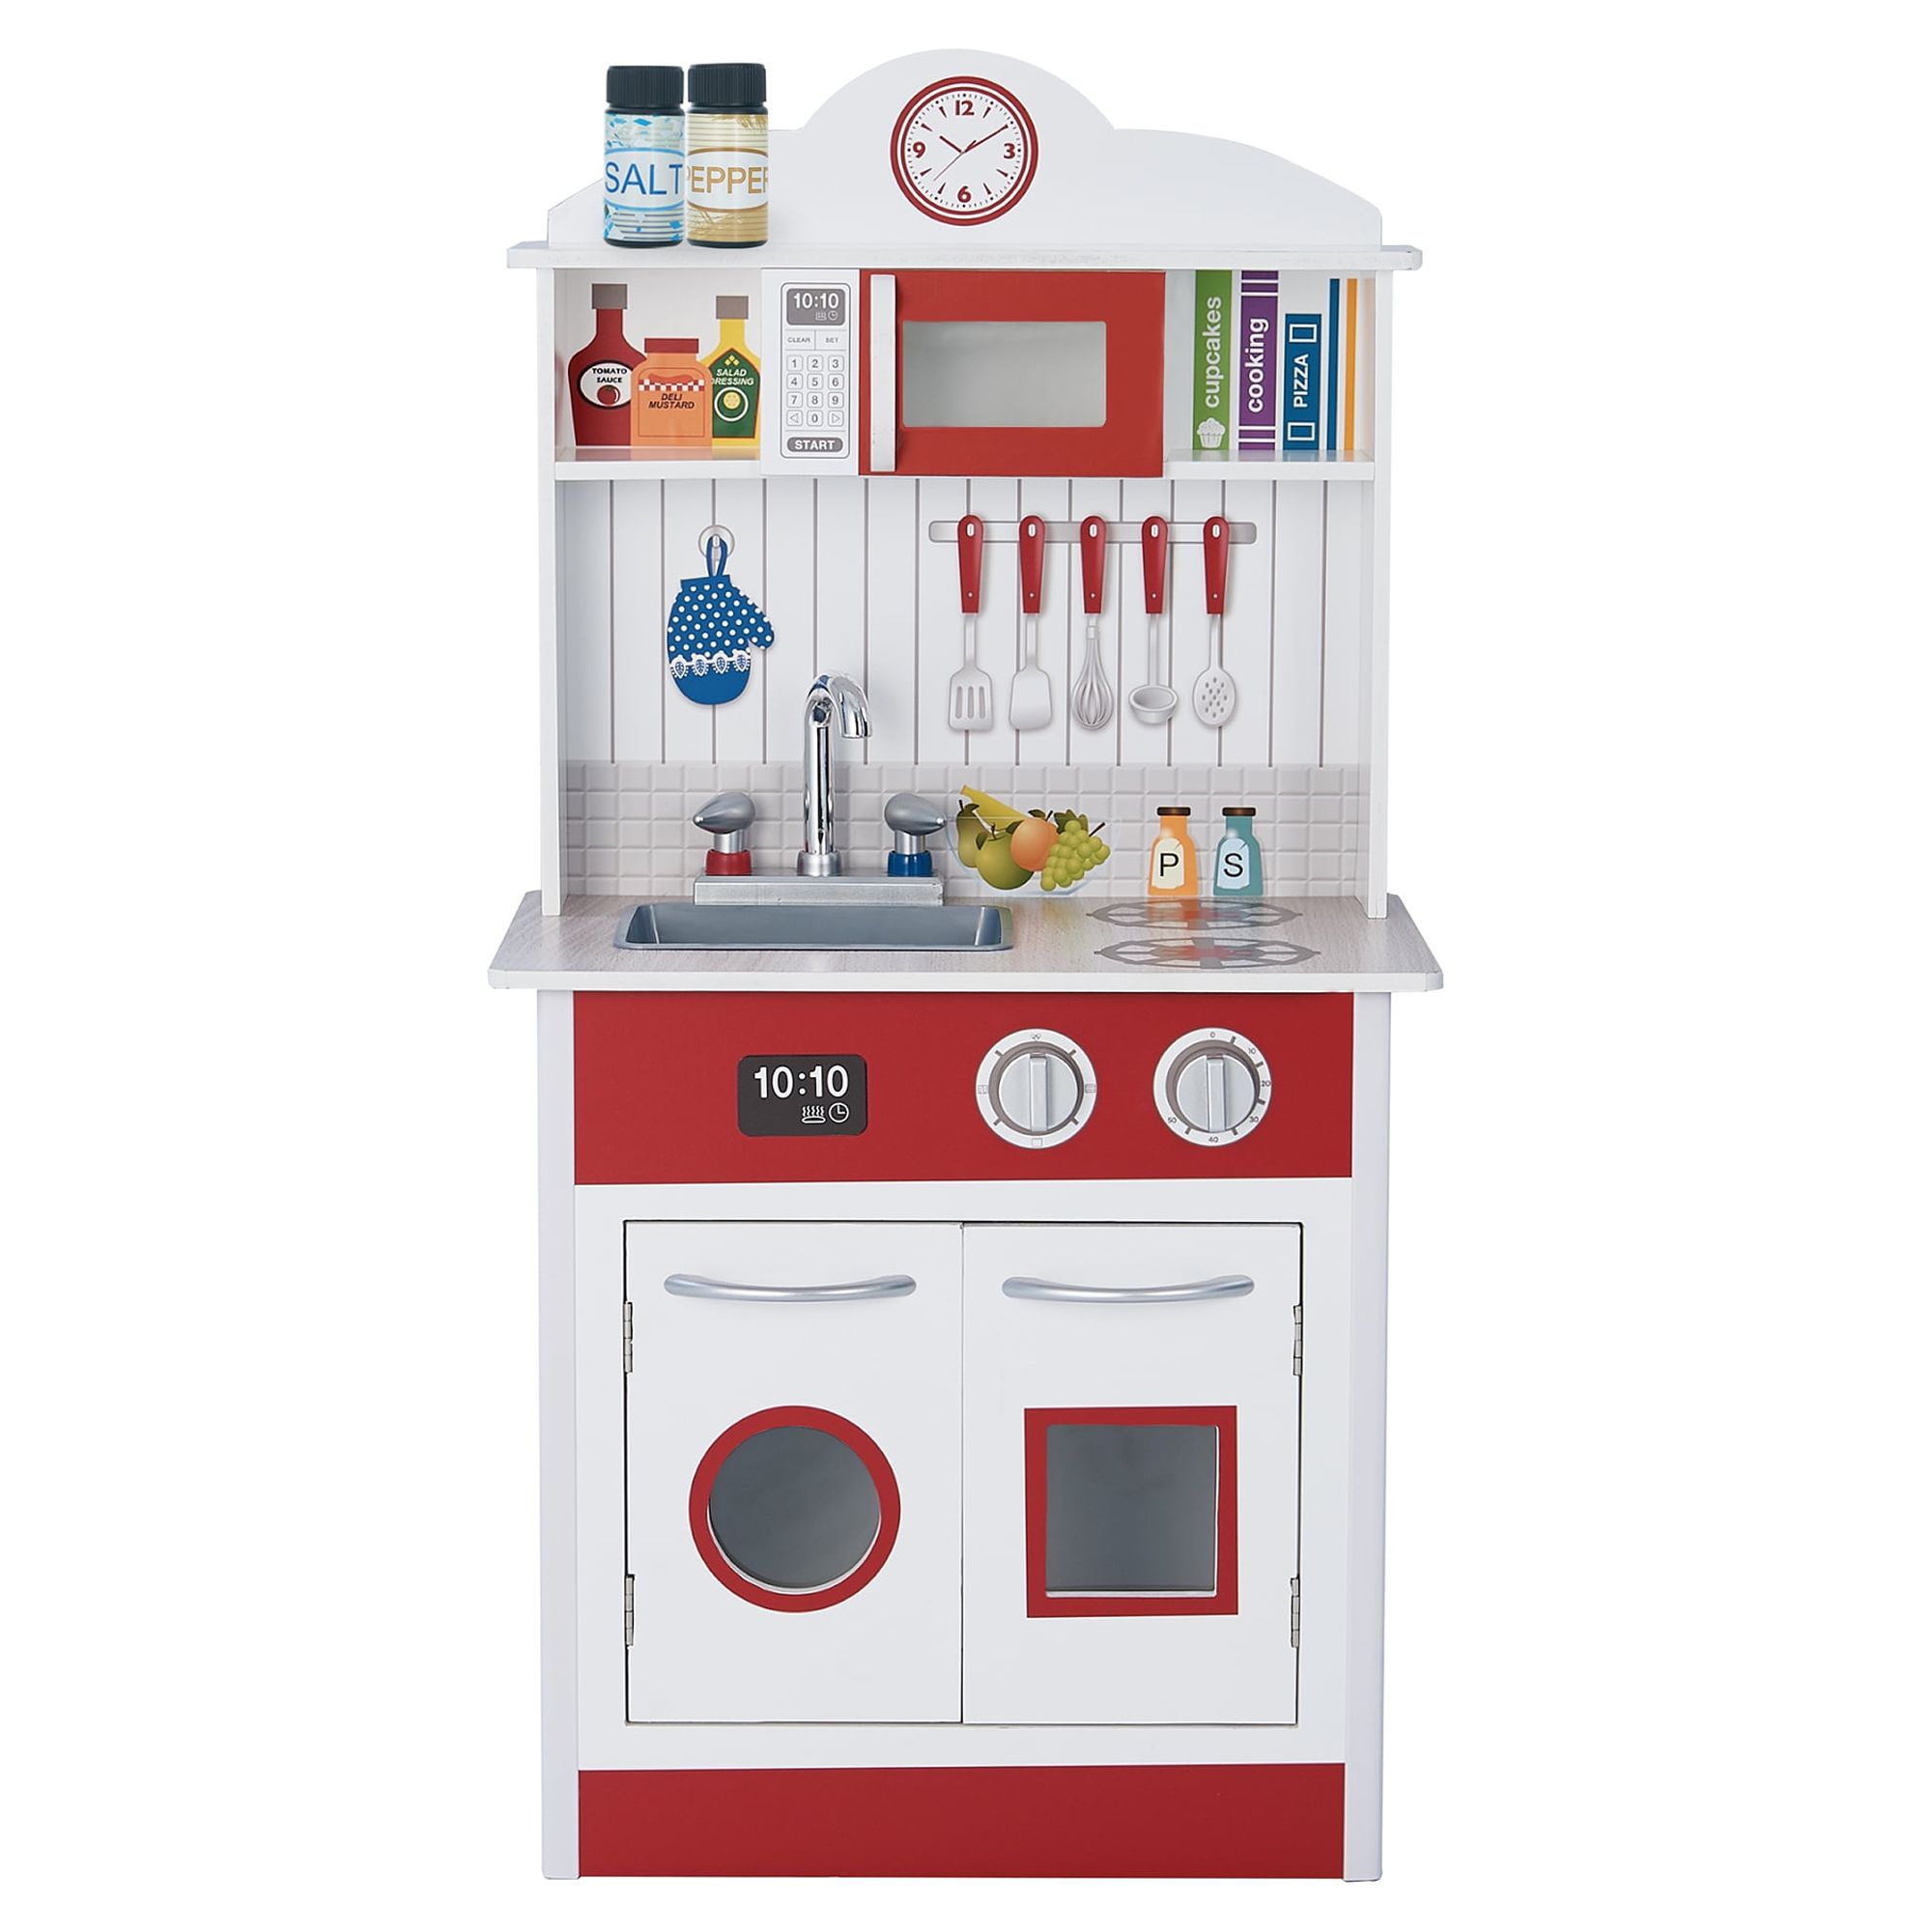 Teamson Kids Little Chef Madrid Classic Kids Kitchen Playset, Red/White - image 1 of 11